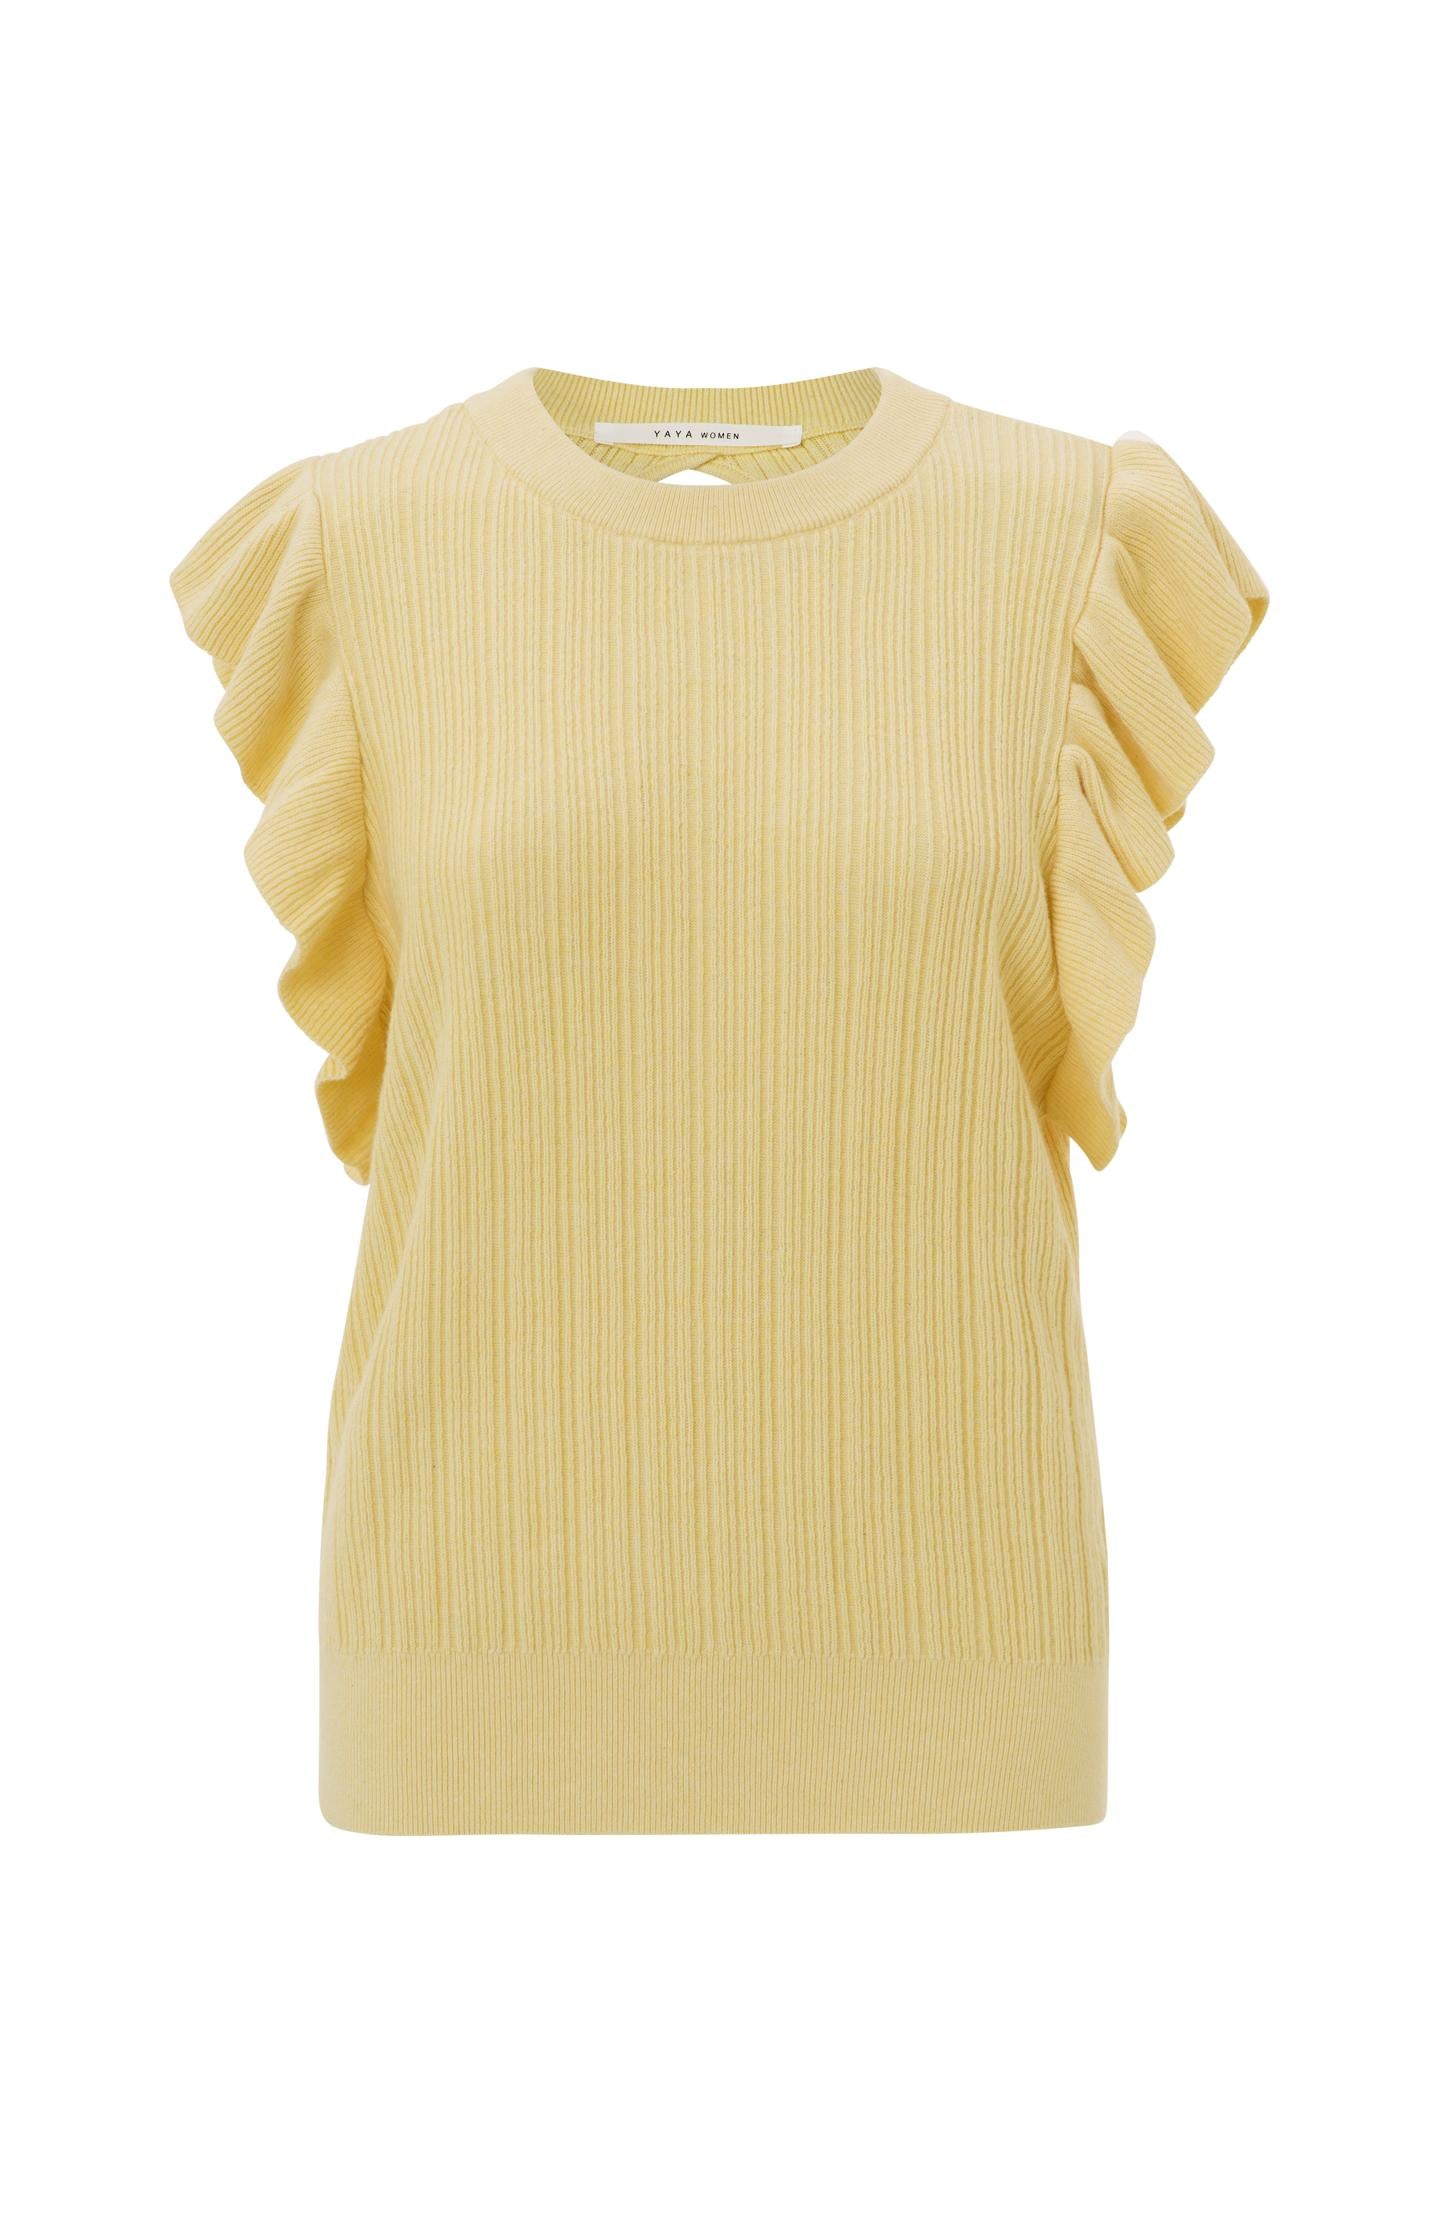 Sweater with round neck, ruffled cap sleeves and back detail - Type: product